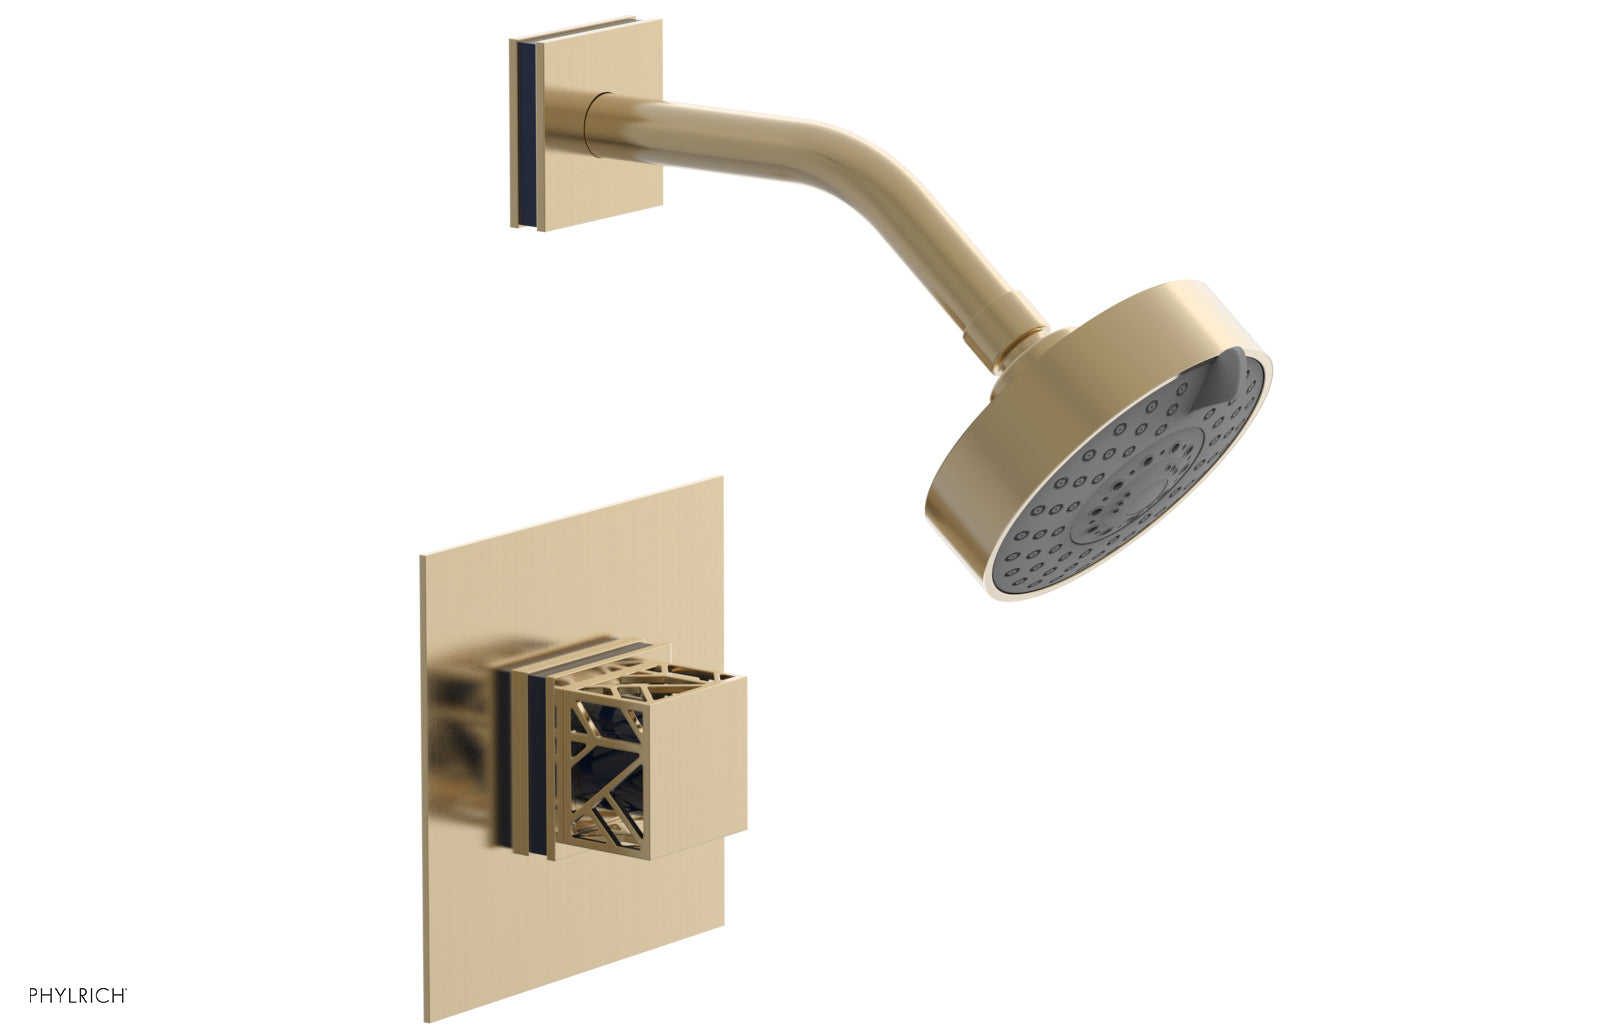 Phylrich JOLIE Pressure Balance Shower Set - Square Handle with "Navy Blue" Accents